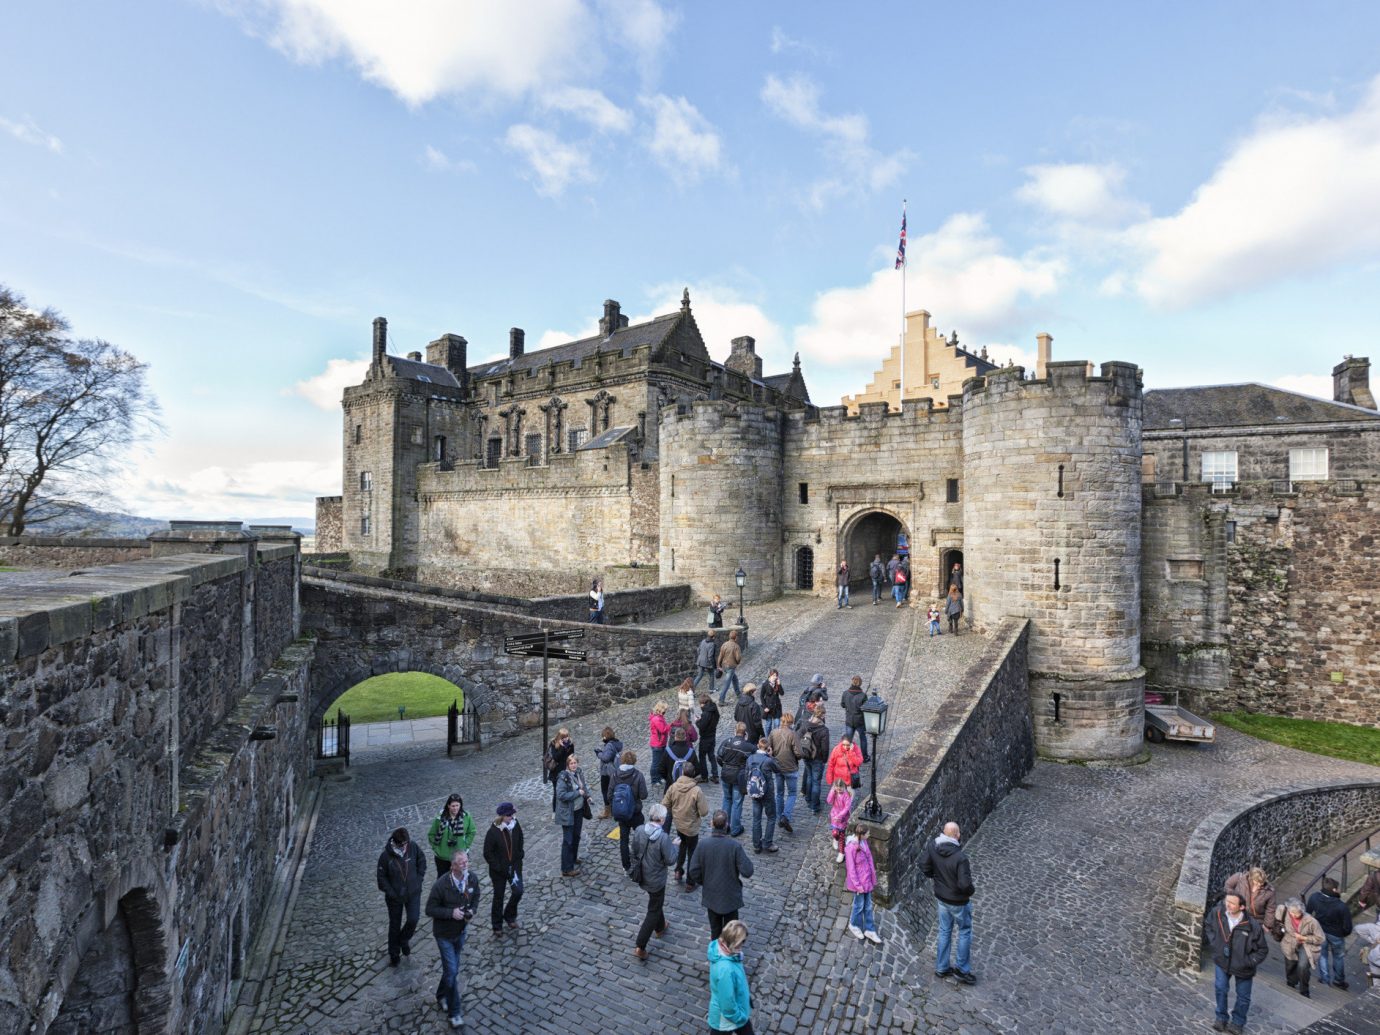 Landmarks Offbeat sky outdoor castle wall building fortification château historic site medieval architecture people group history tours tourist attraction tourism middle ages palace stone several crowd